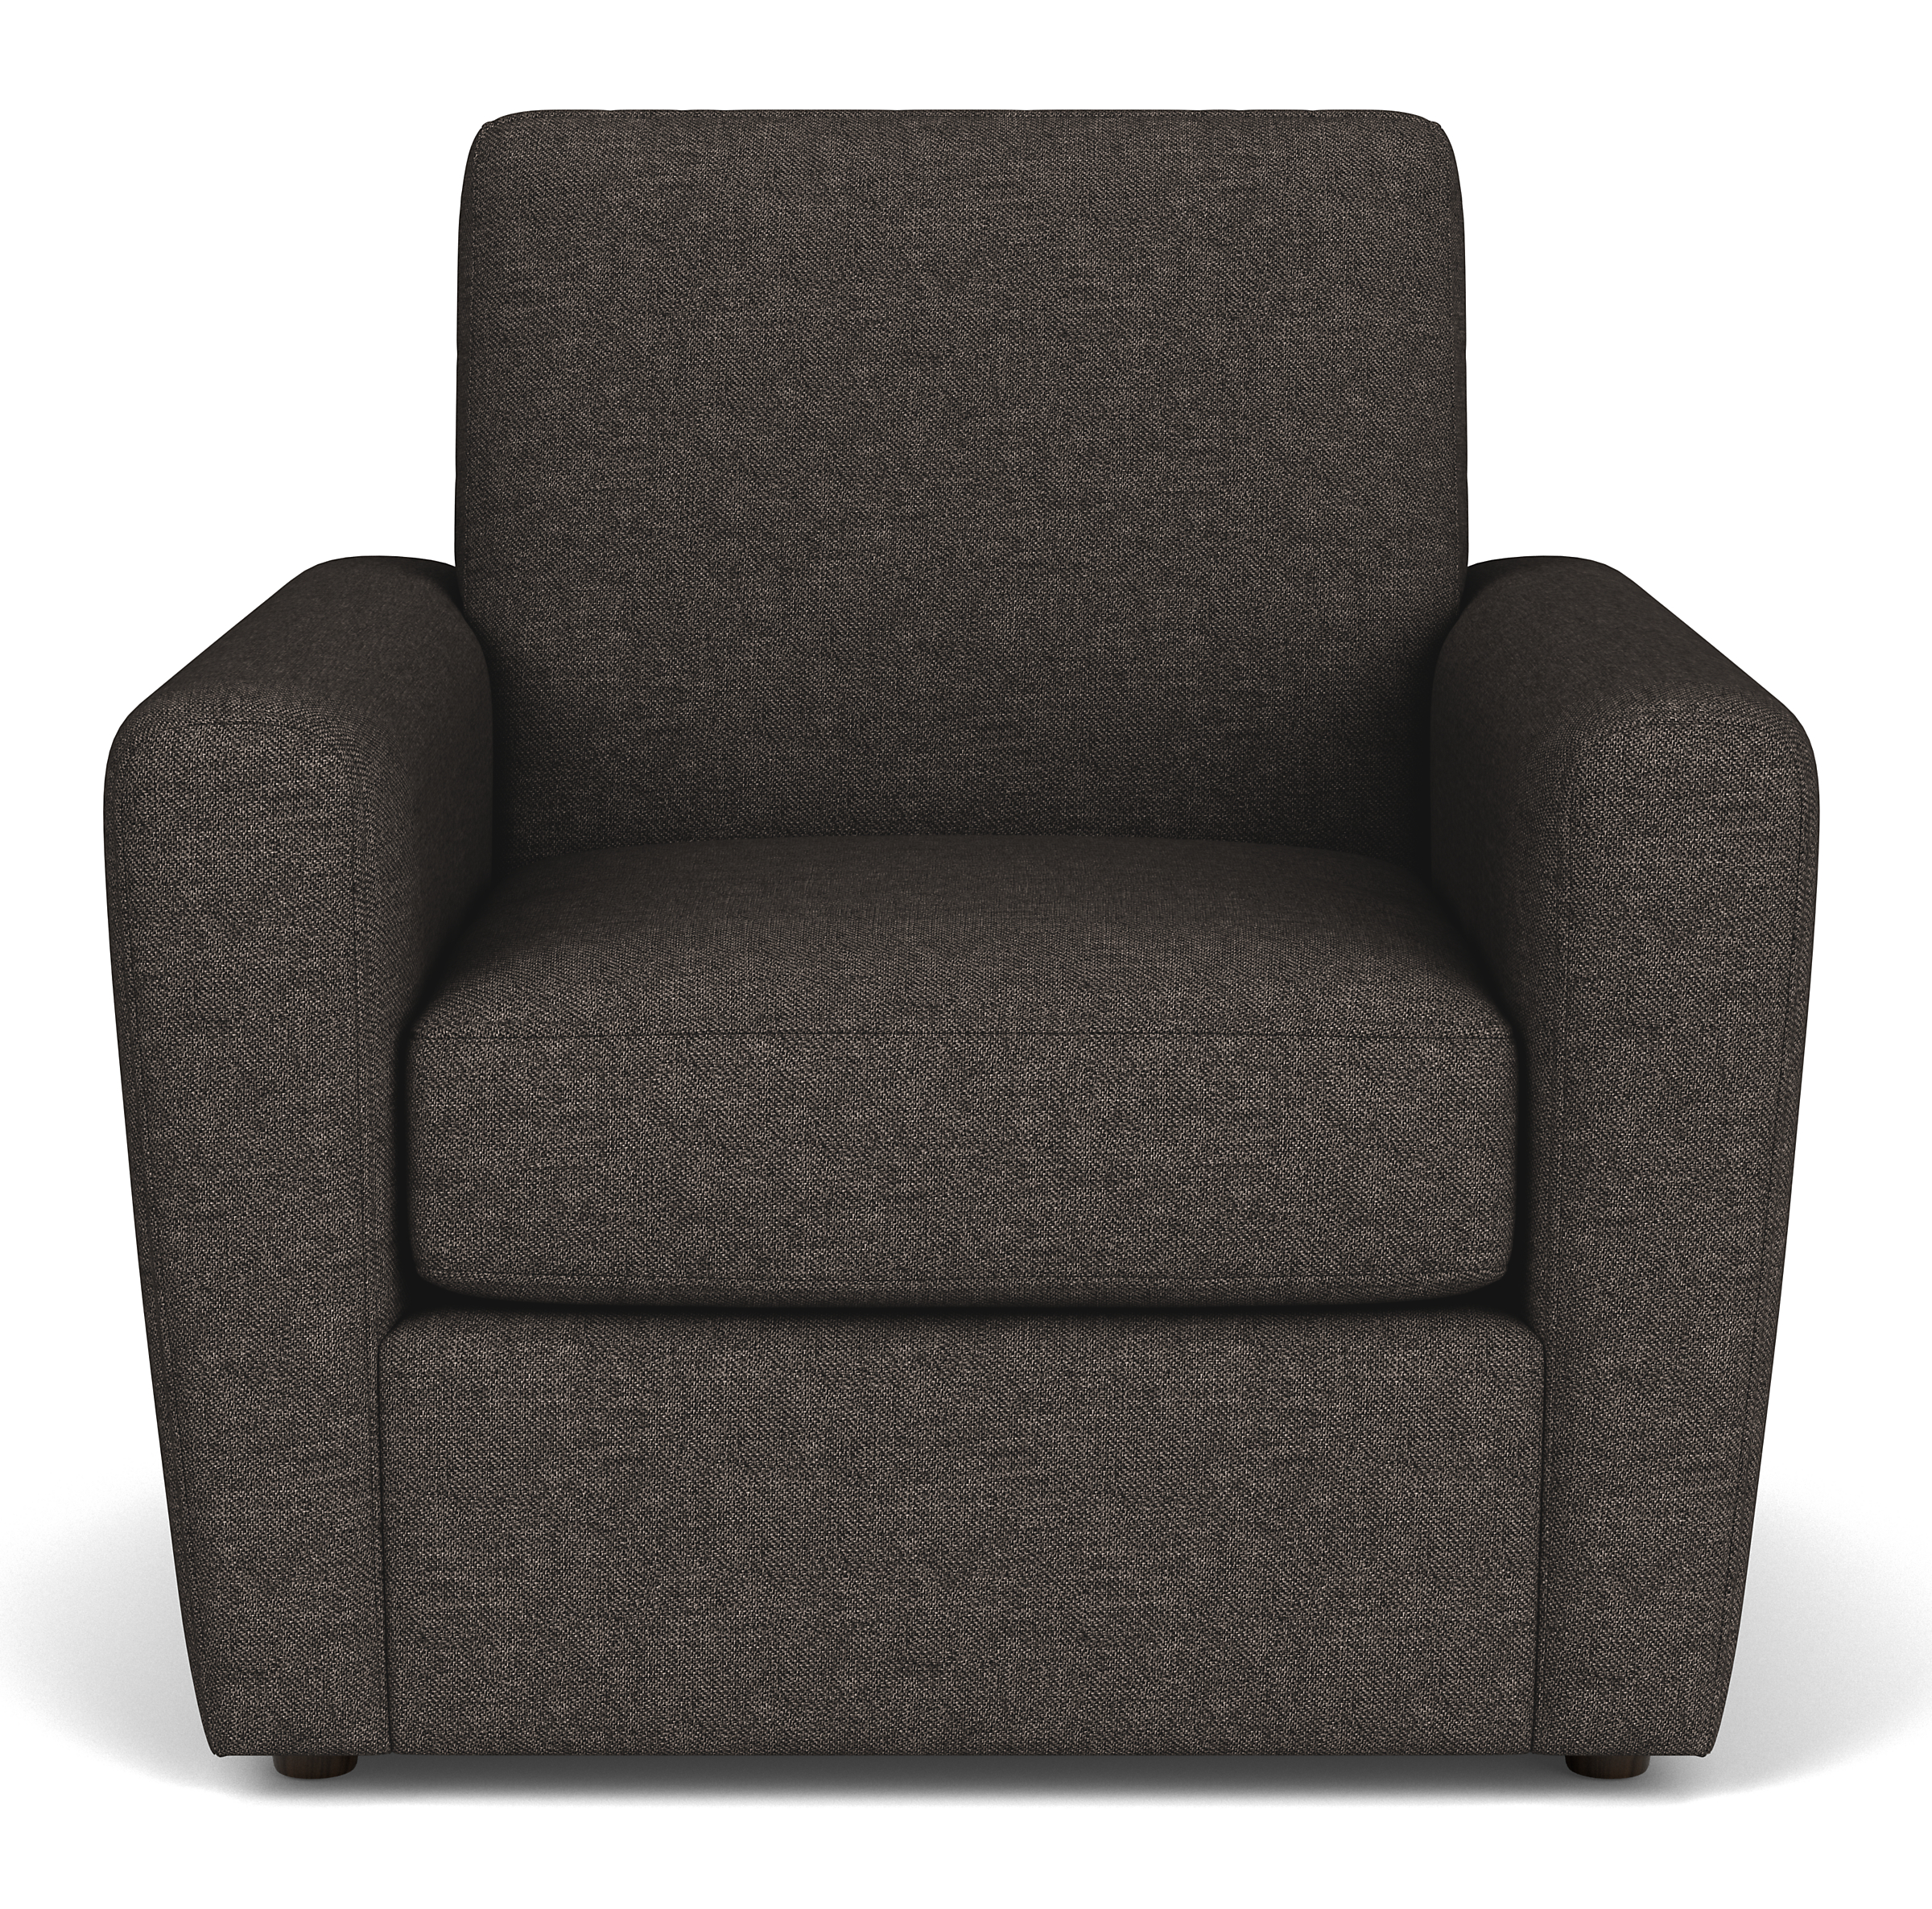 Front view of Seth Chair in Gino Charcoal Fabric.